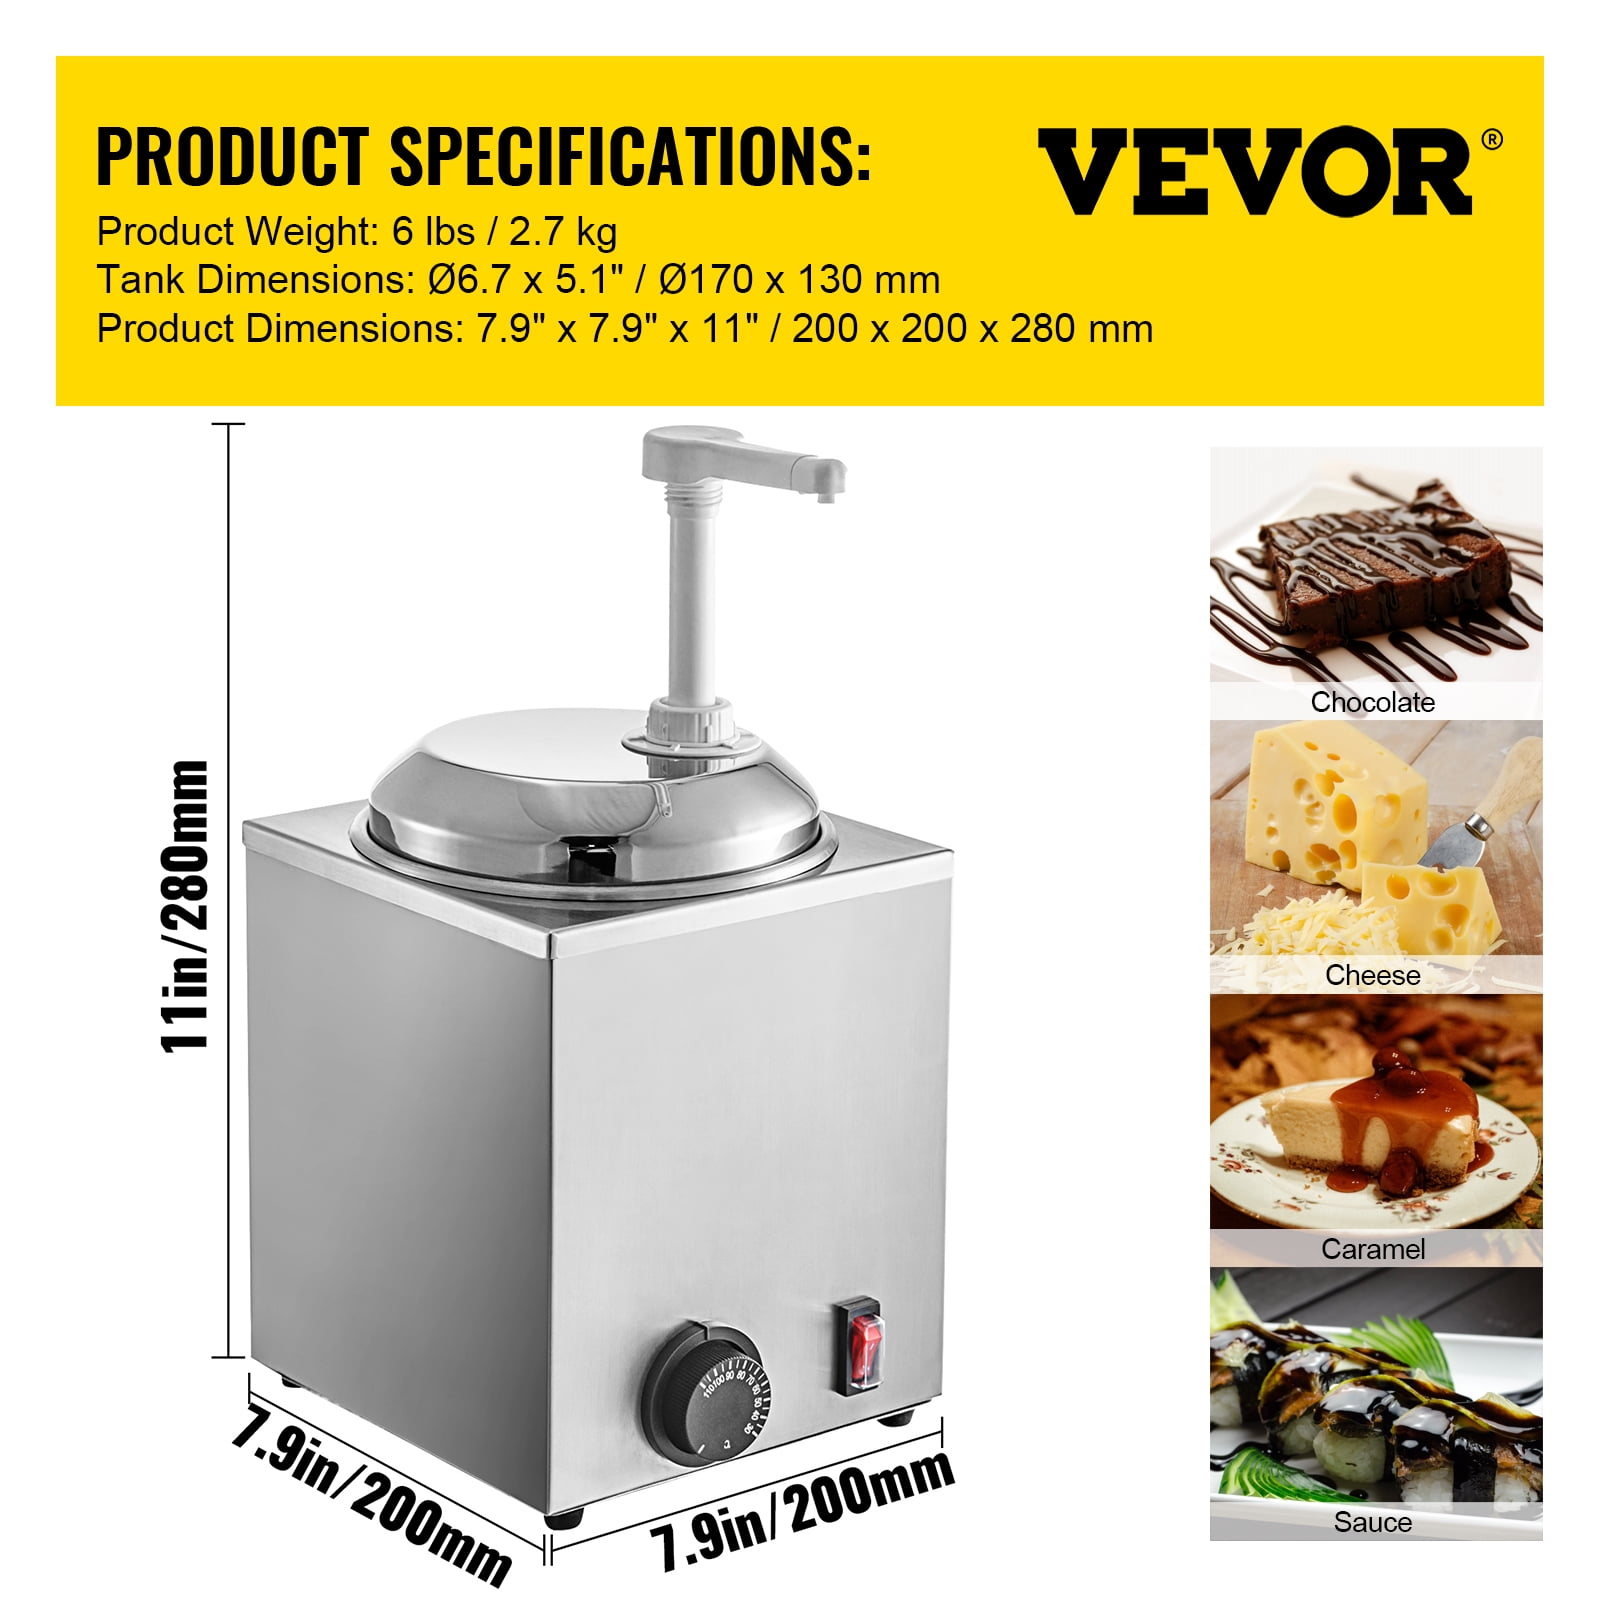 VEVOR Electric Cheese Dispenser with Pump 2.3 qt. Commercial Hot Fudge  Warmer Stainless Steel Heated Pump Dispenser DRNZBBXG25LY6YLESV1 - The Home  Depot